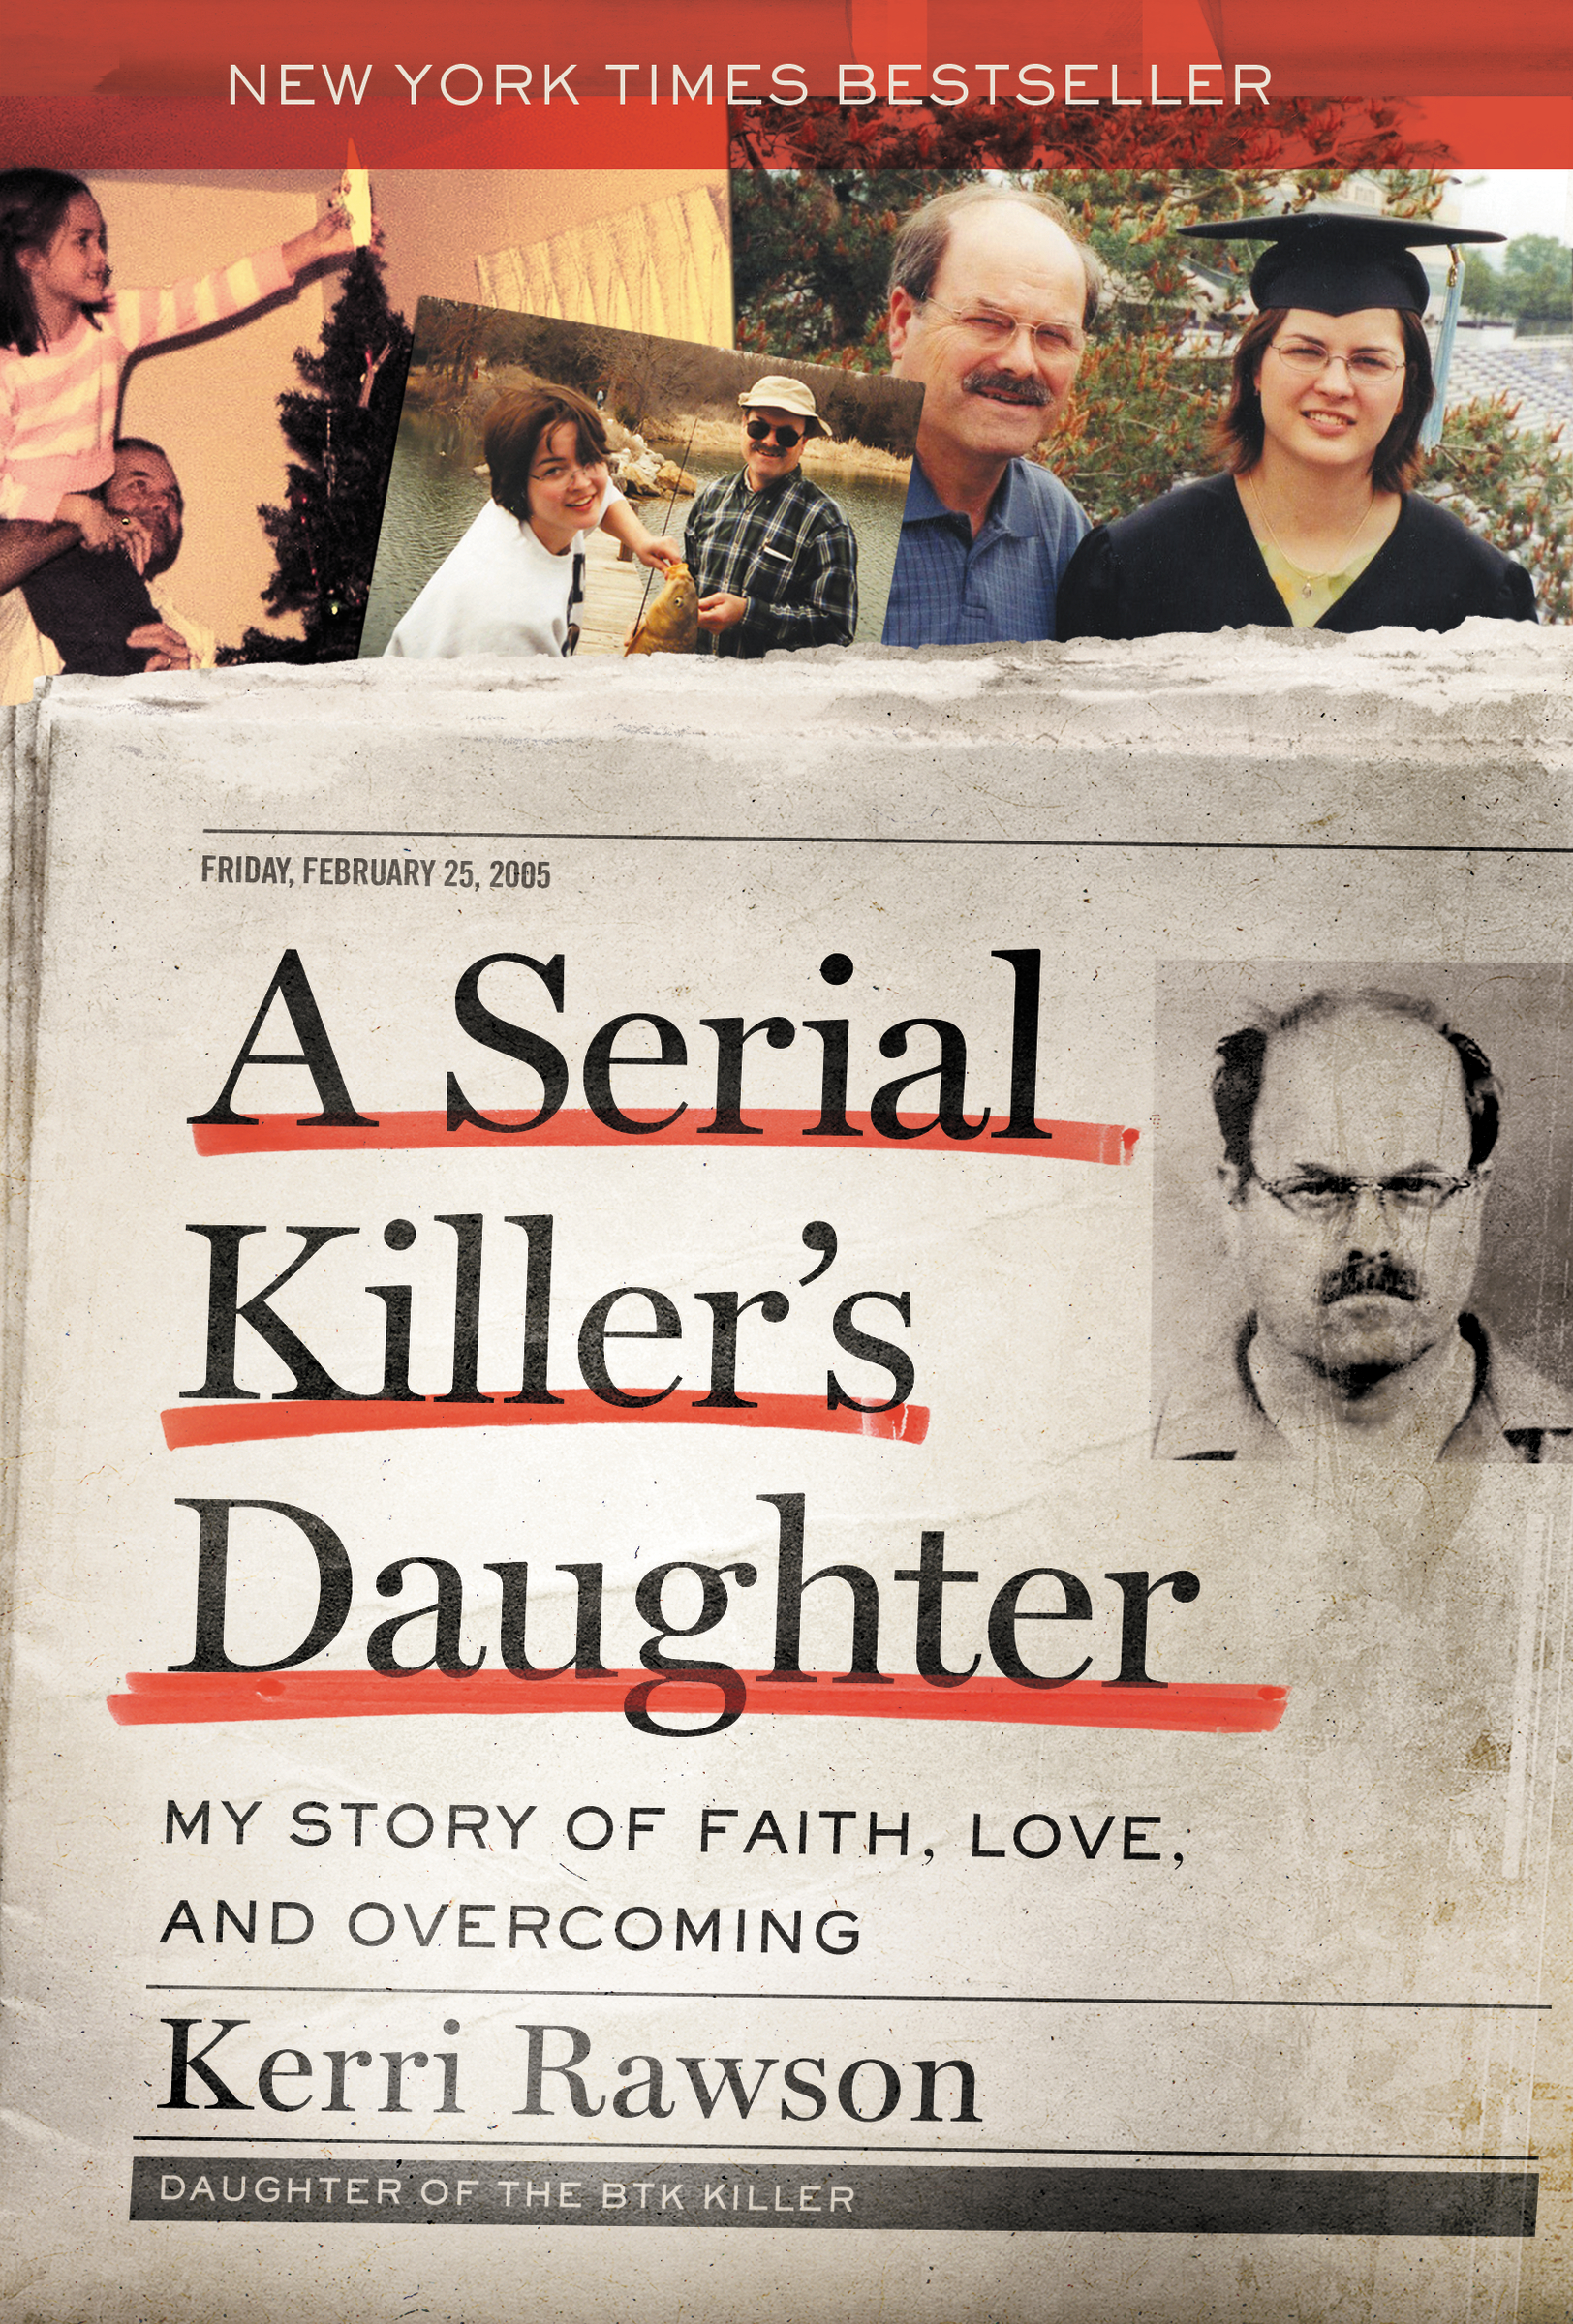 A serial killer's daughter my story of faith, love, and overcoming cover image